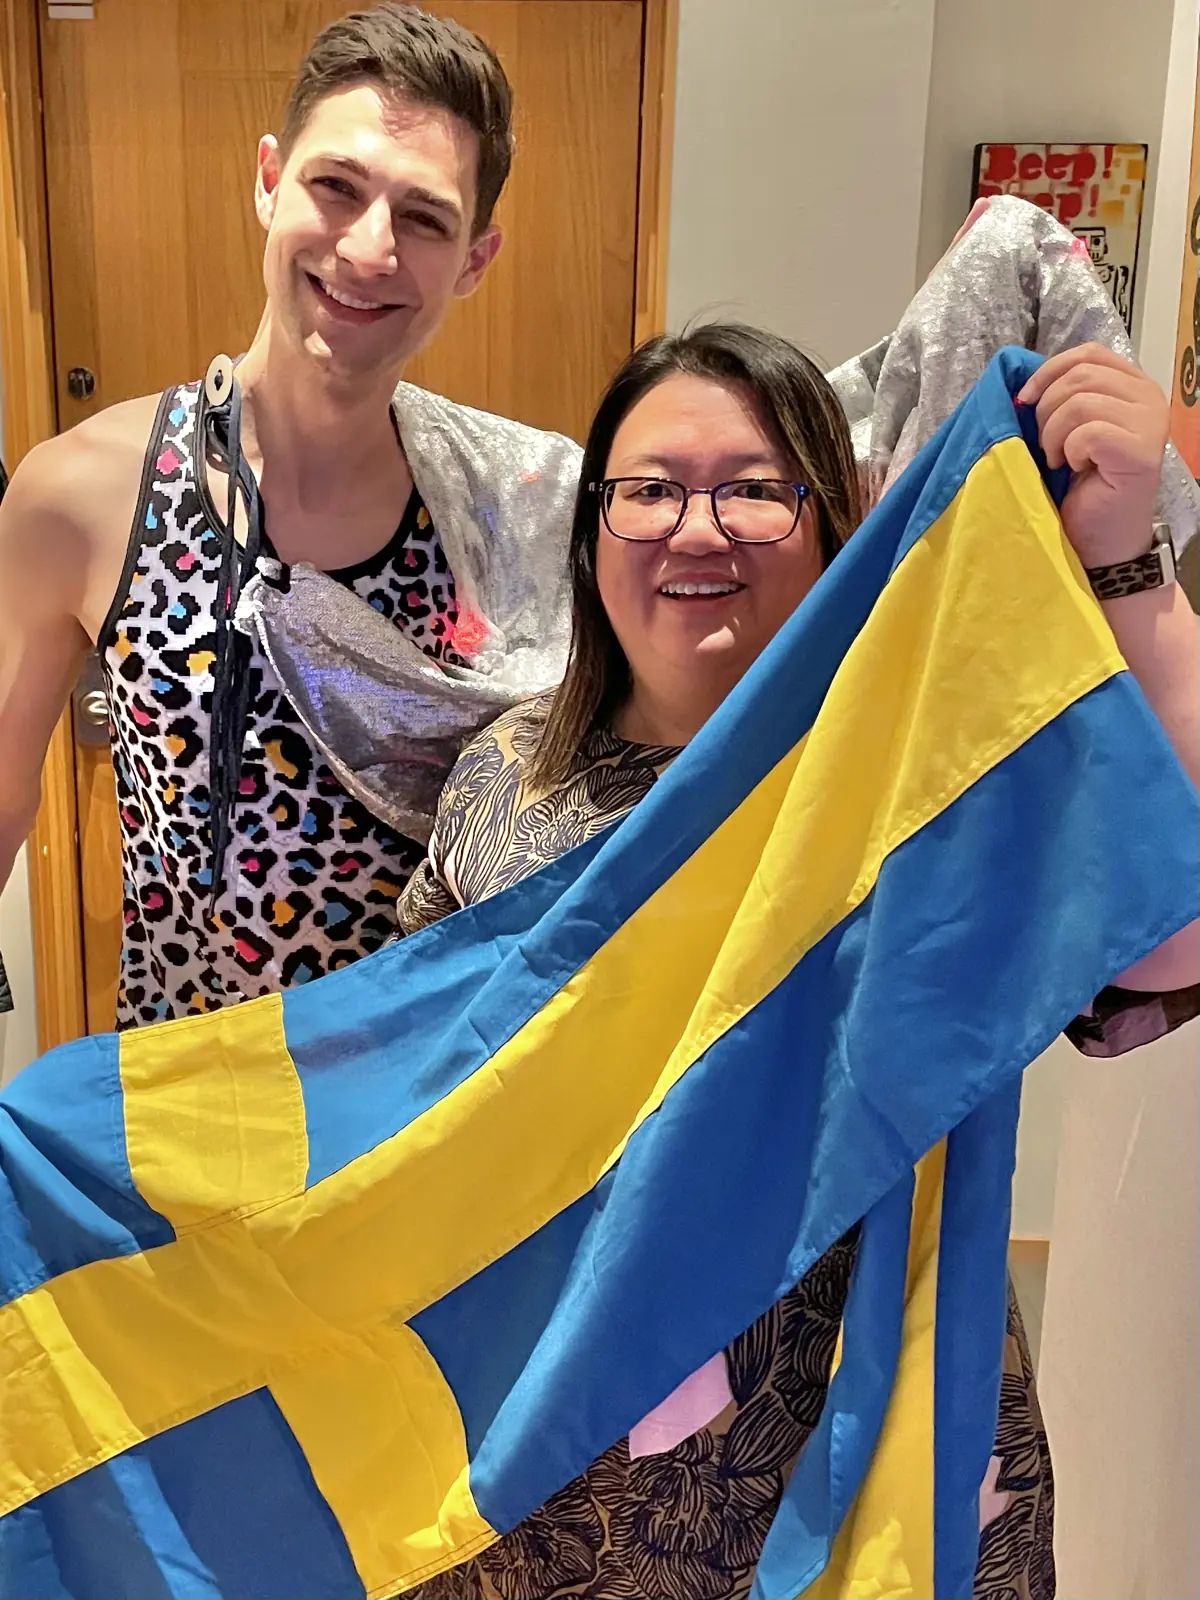 Jeremiah dressed in a rainbow cheetah print shirt and Vivien holding a Swedish flag